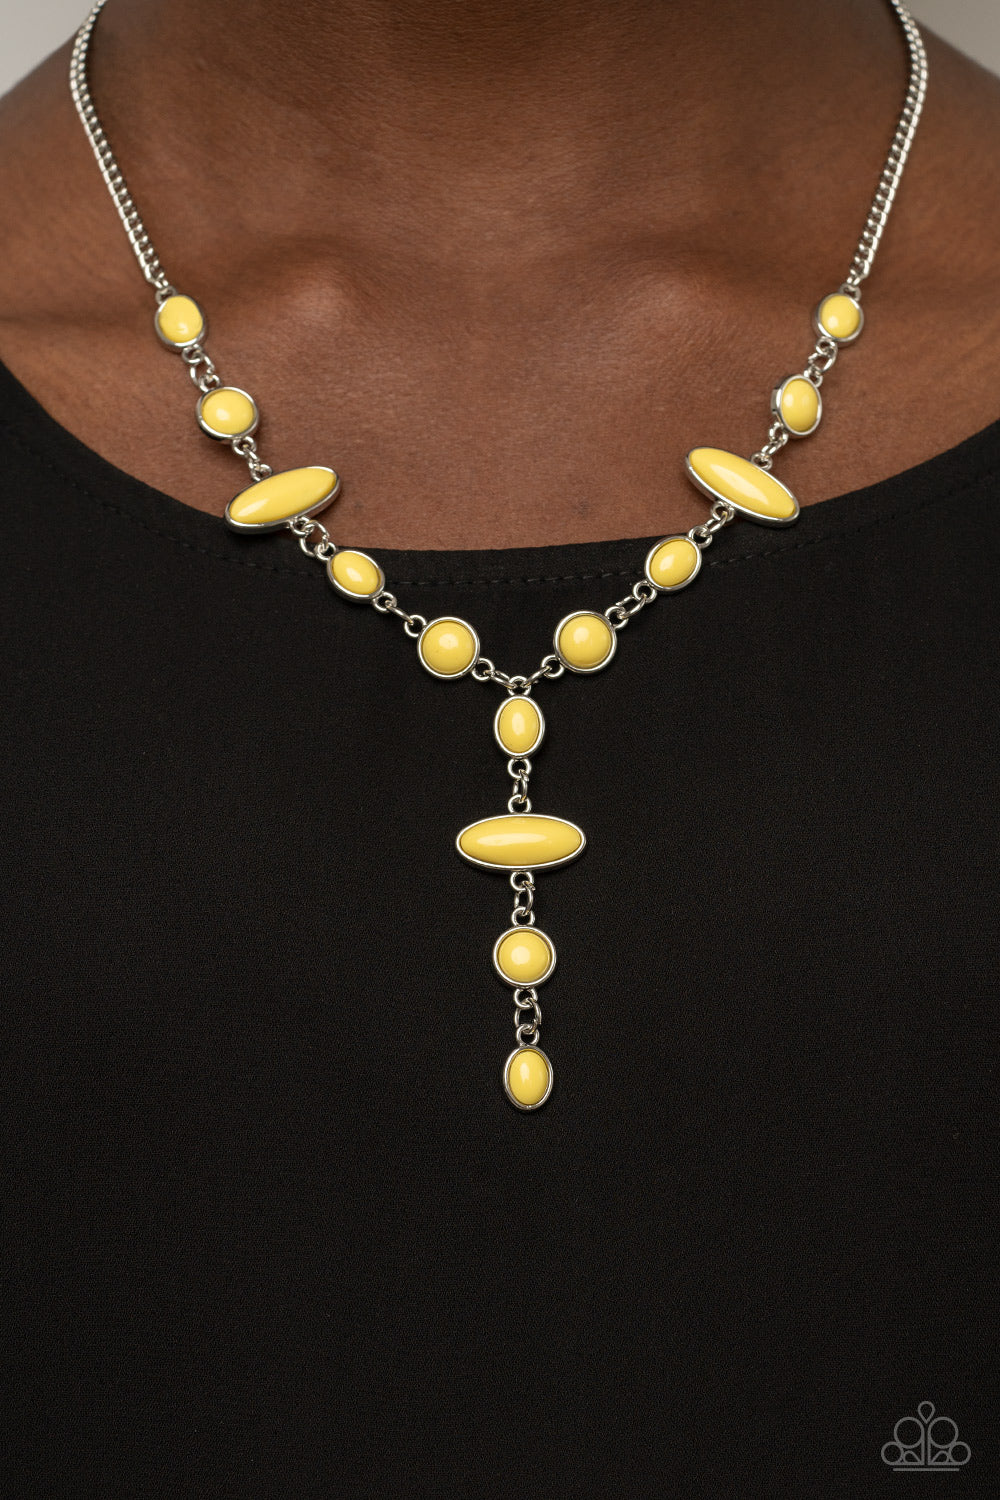 Authentically Adventurous - Yellow - Bella Bling by Natalie